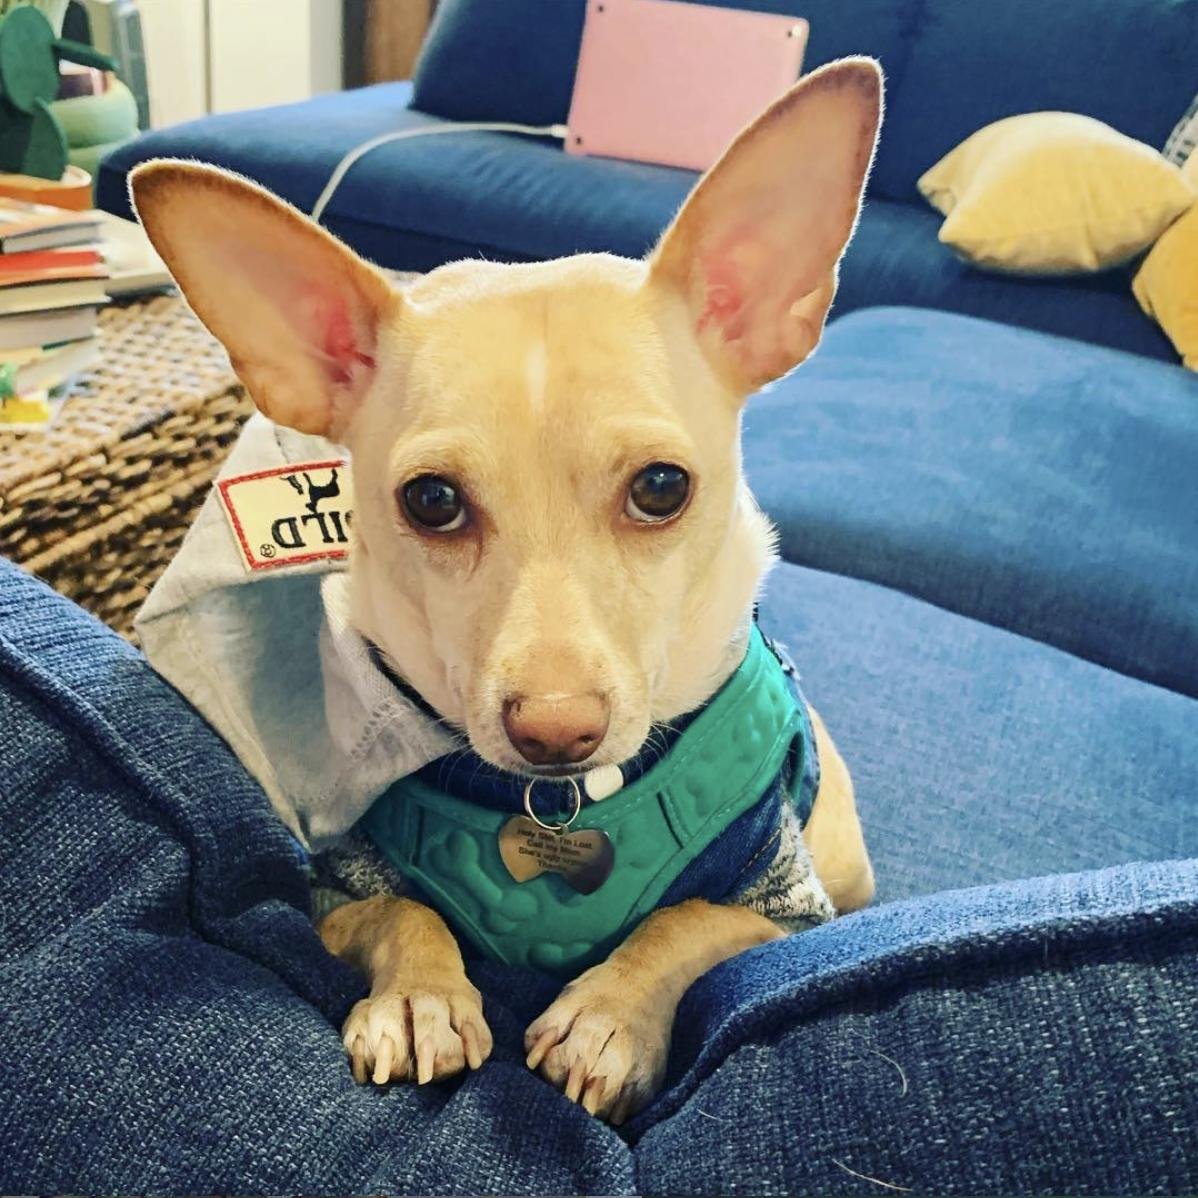 Rescued off the streets of East Los Angeles by @thedogcafela . Found his furever home on Jan 9th 2019. 2 year old Chi mix! Anxiously awaiting his DNA results!